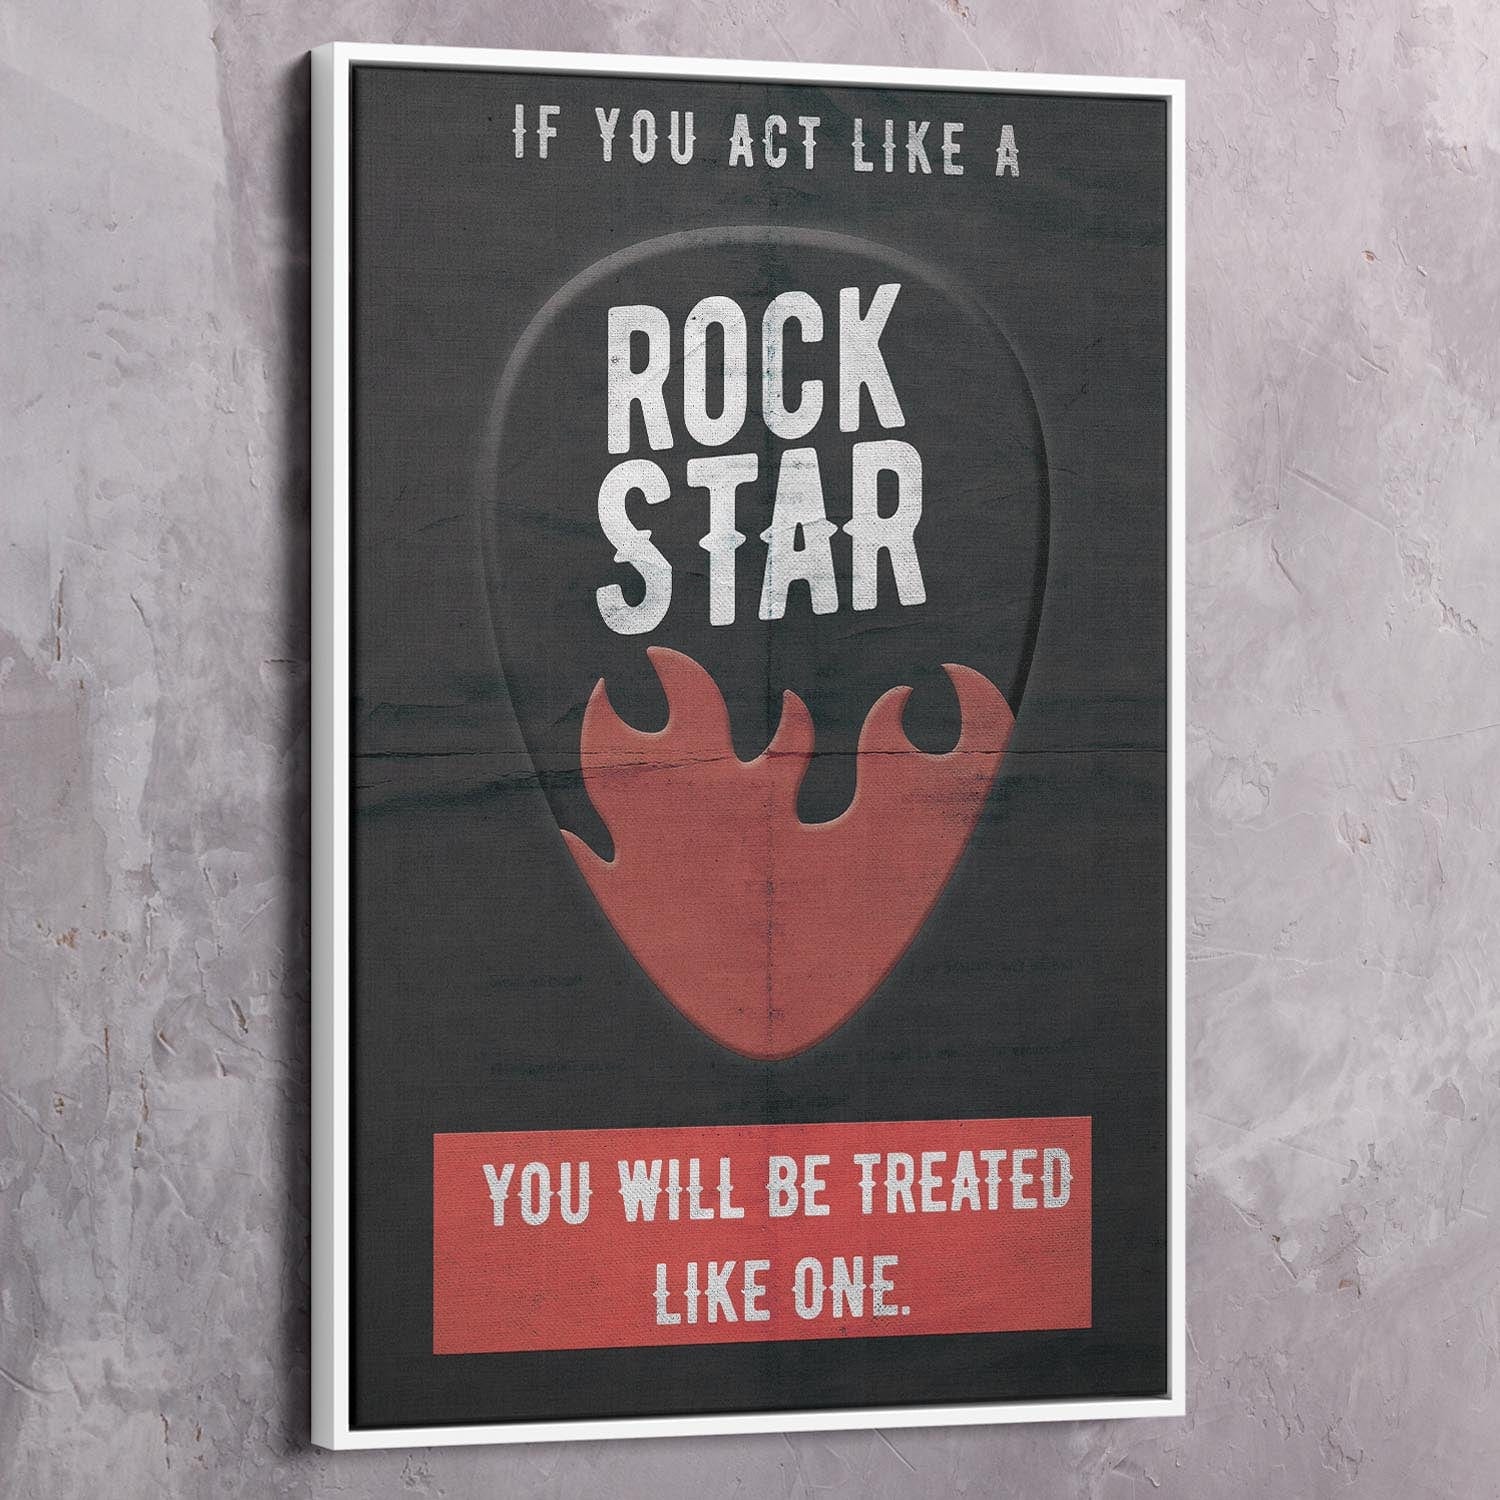 If You Act Like A Rock Star Quote Wall Art | Inspirational Wall Art Motivational Wall Art Quotes Office Art | ImpaktMaker Exclusive Canvas Art Portrait